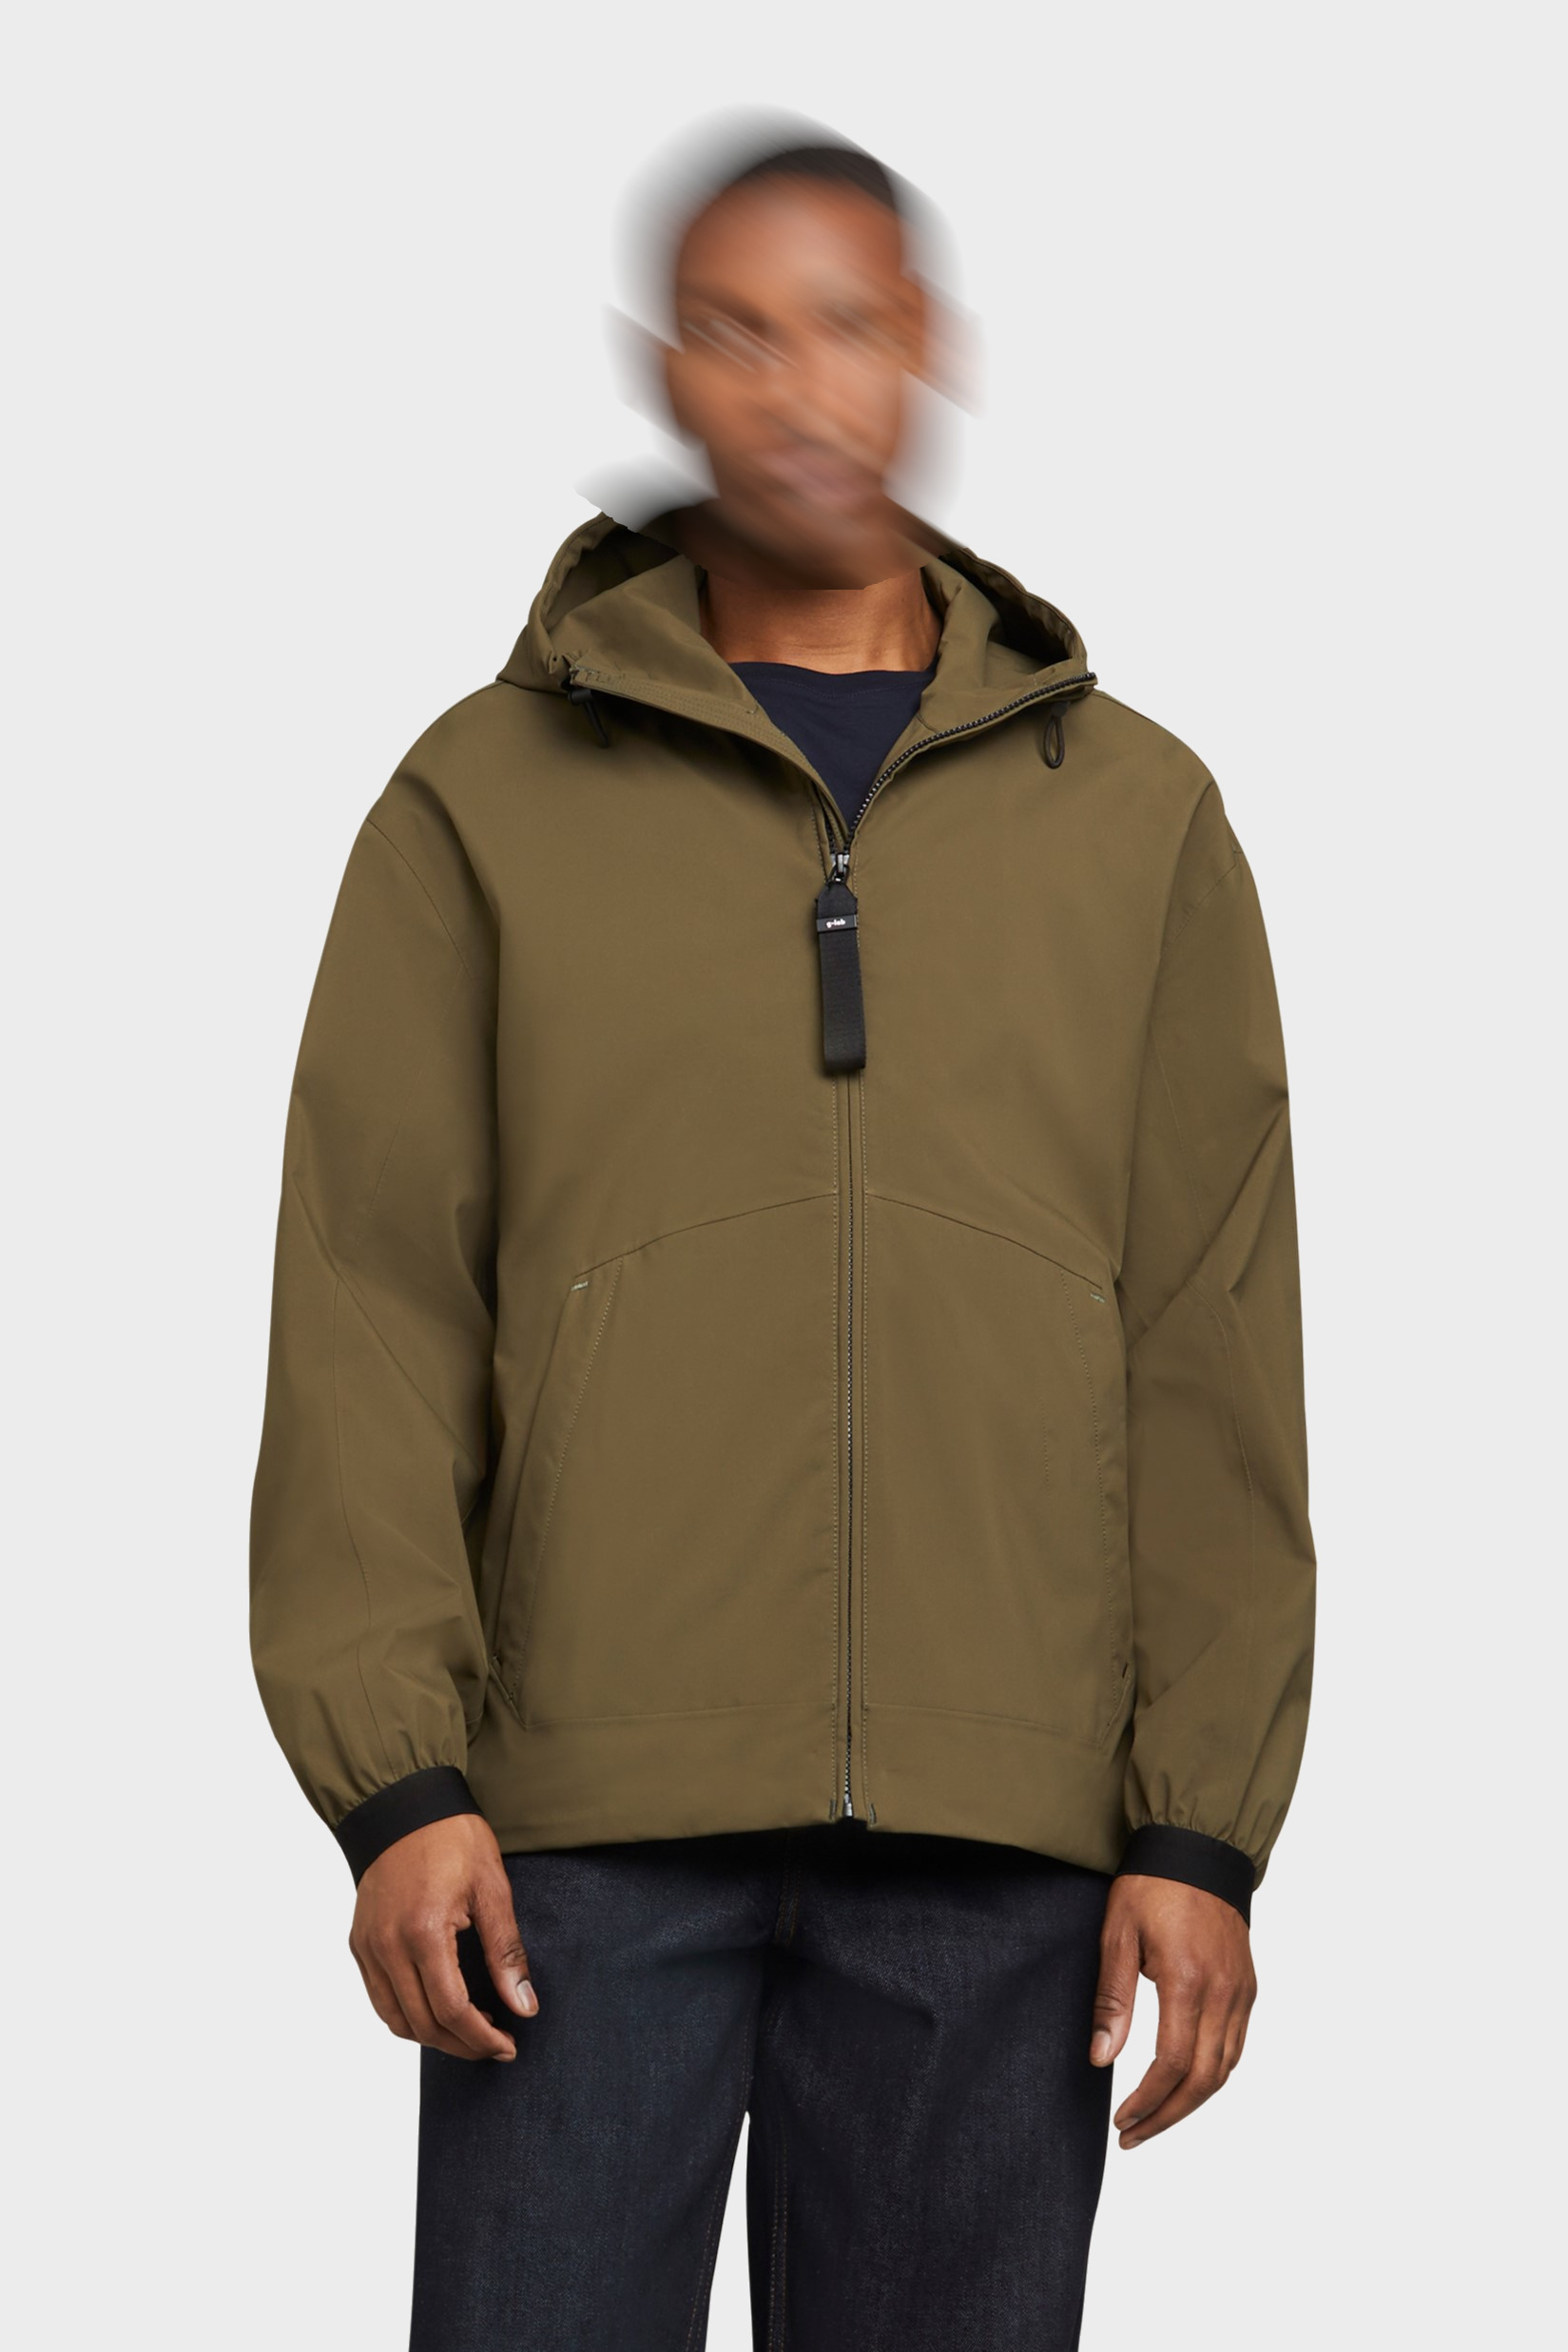 G-LAB Waterproof Light Jacket Pace in Olive XL